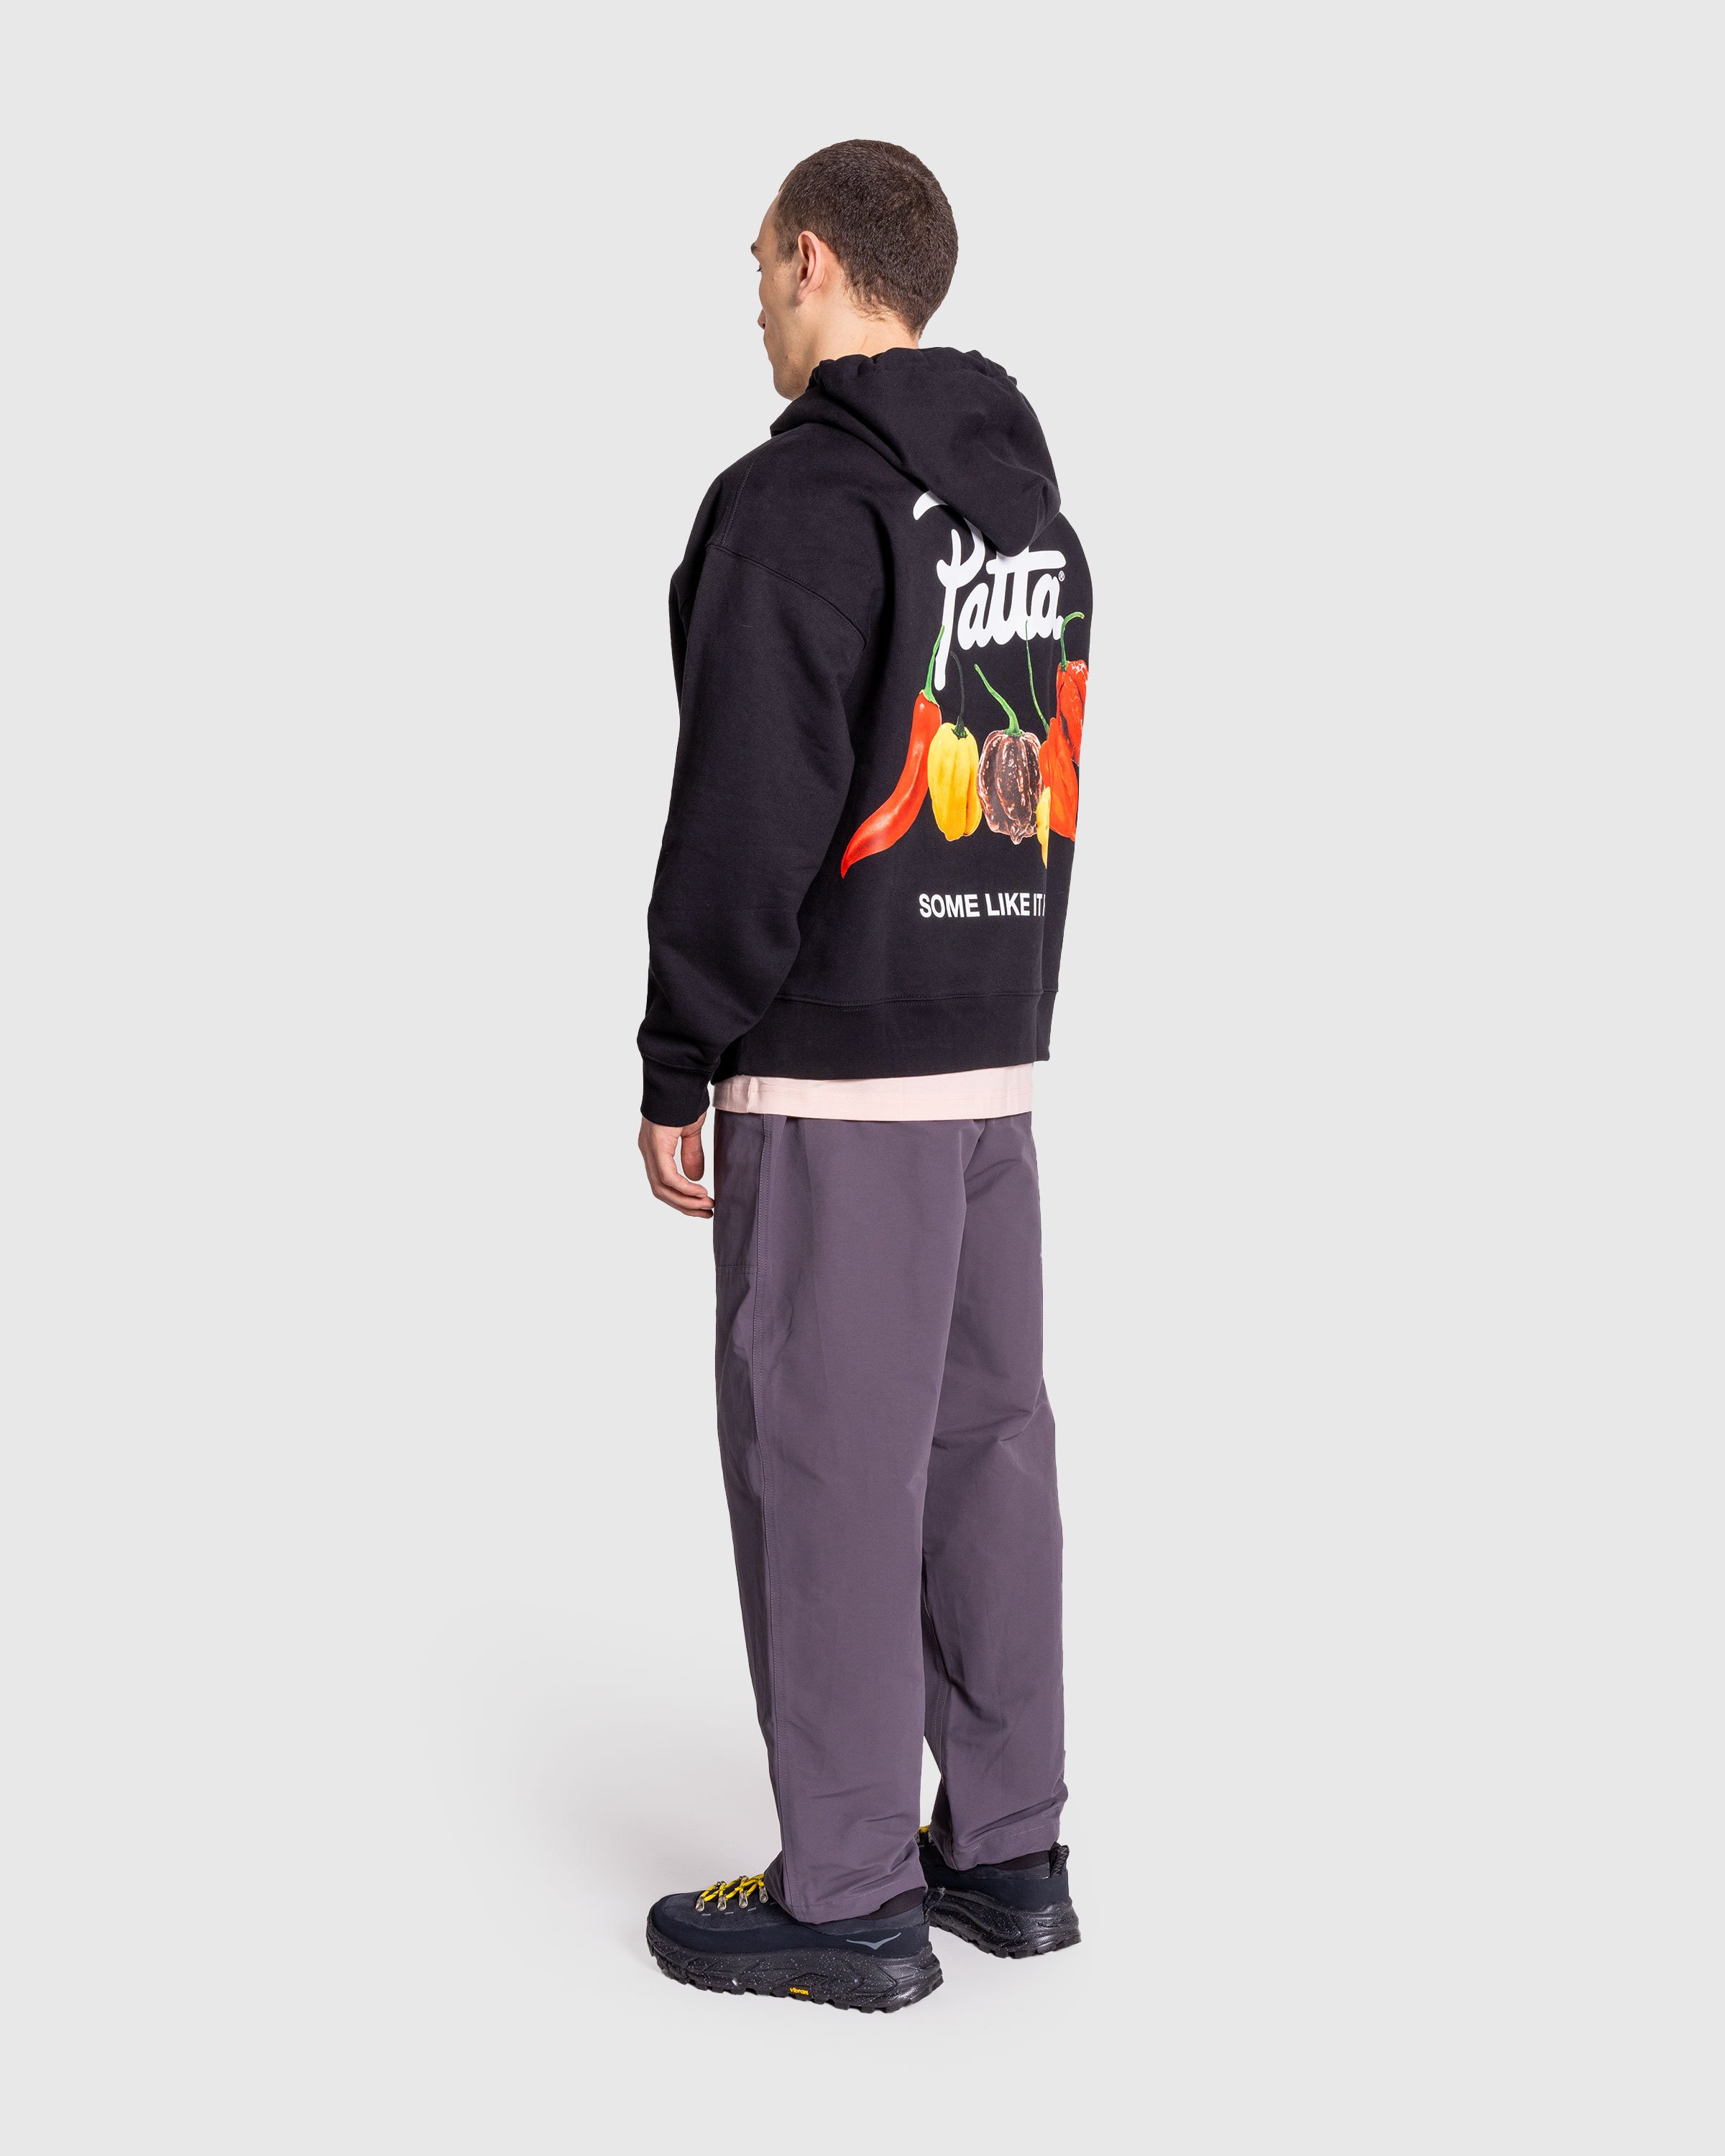 Patta - Some Like It Hot Classic Hooded Sweater Black - Clothing - Black - Image 4